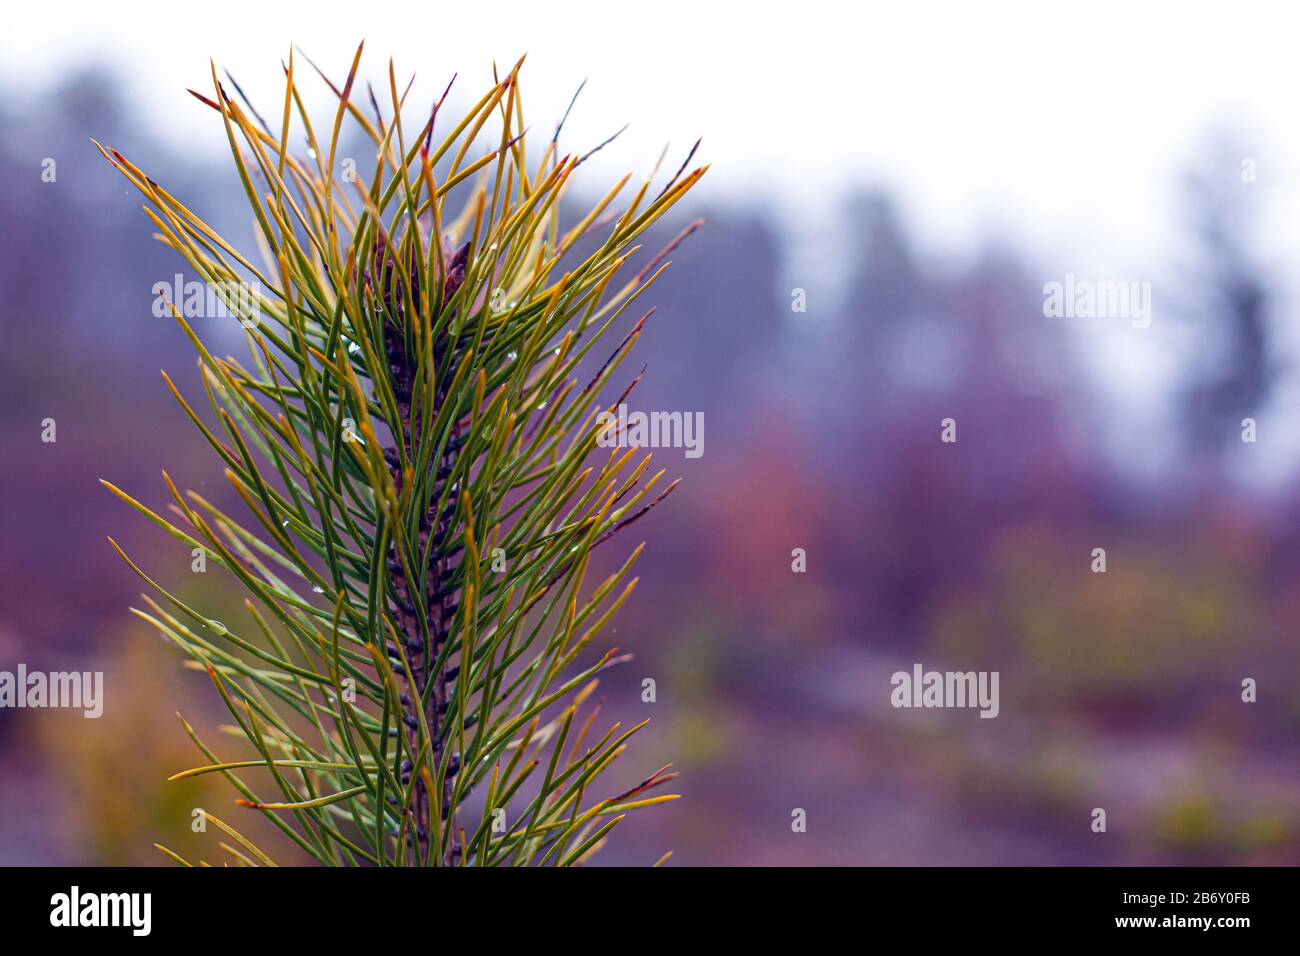 sprig of coniferous evergreen pine on blurred forest background with dew drops on needles. close-up. Stock Photo